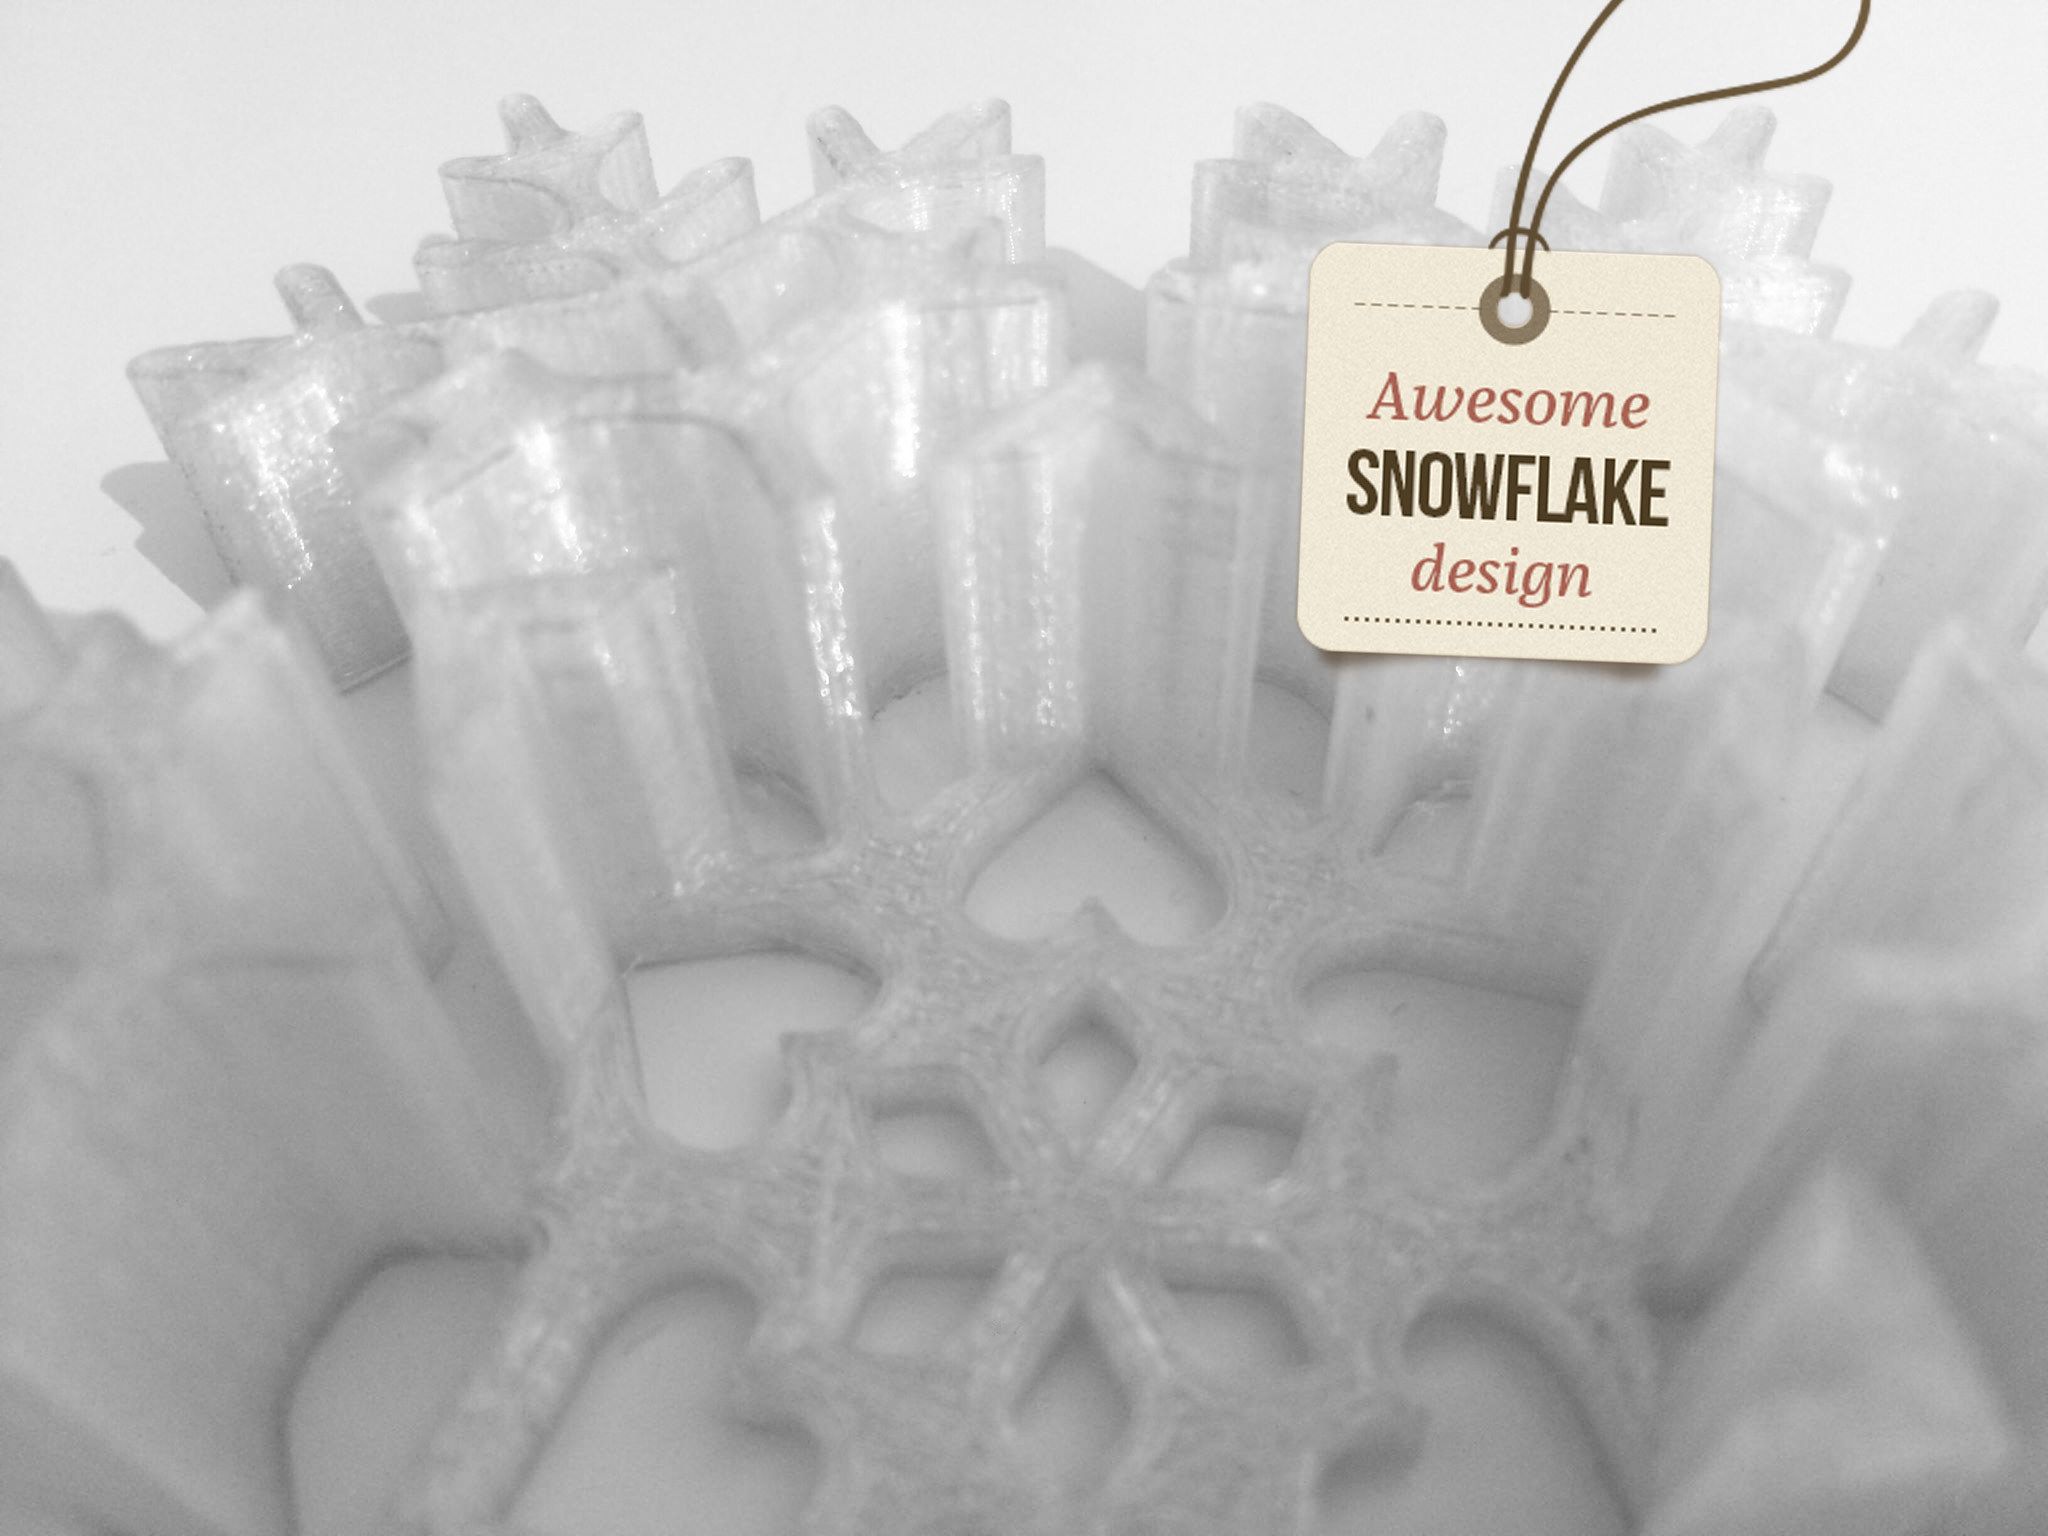 th2.jpg Download free STL file Tealight snowflake holder - christmas decoration • 3D printing object, macnet